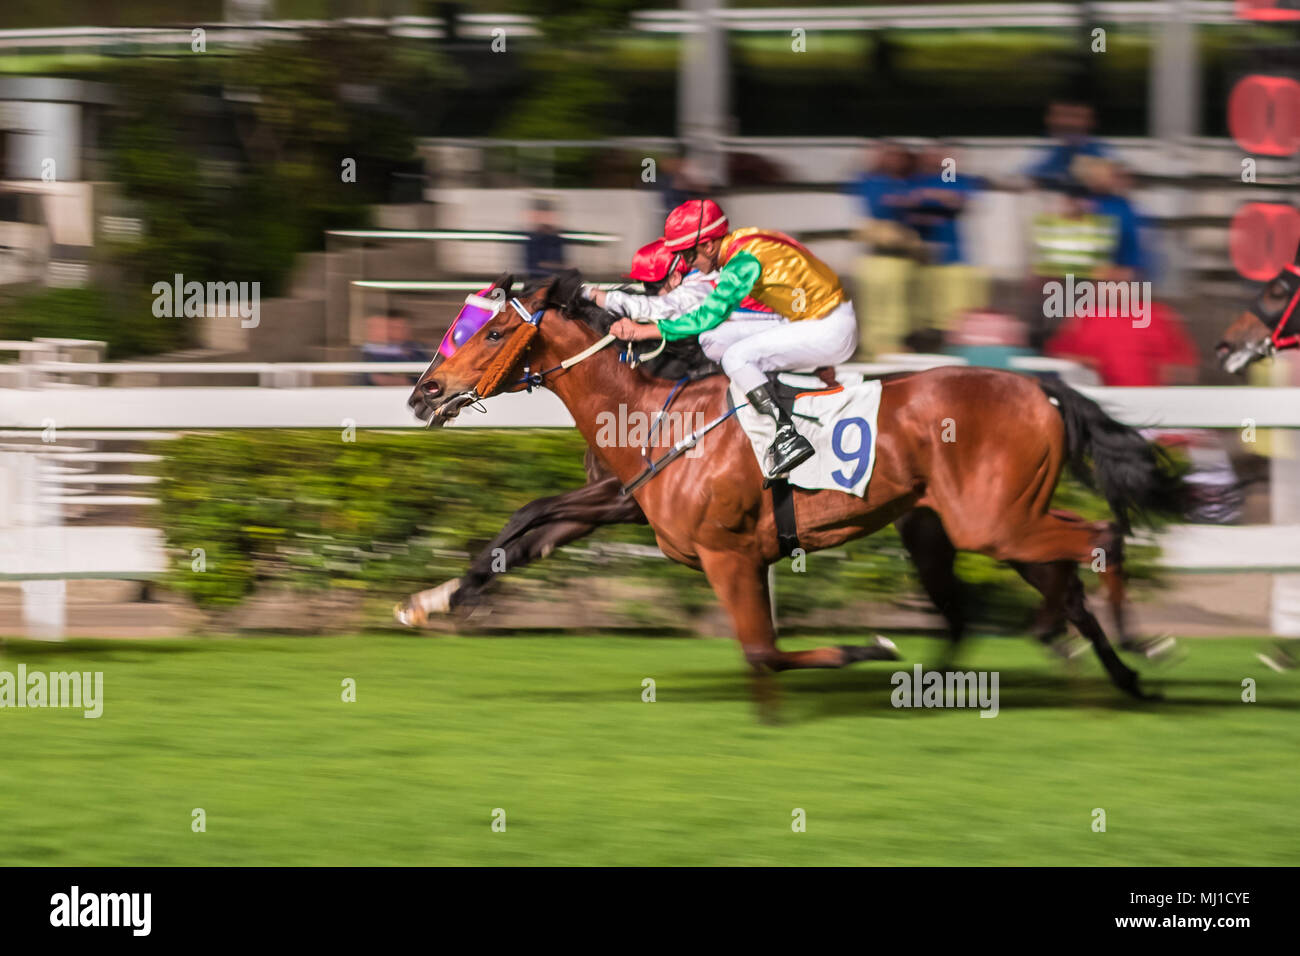 Racehorses ridden by jockeys running fast during the race at racetrack. Striving to victory. Hong Kong Happy Valley race course. Motion blur. Stock Photo